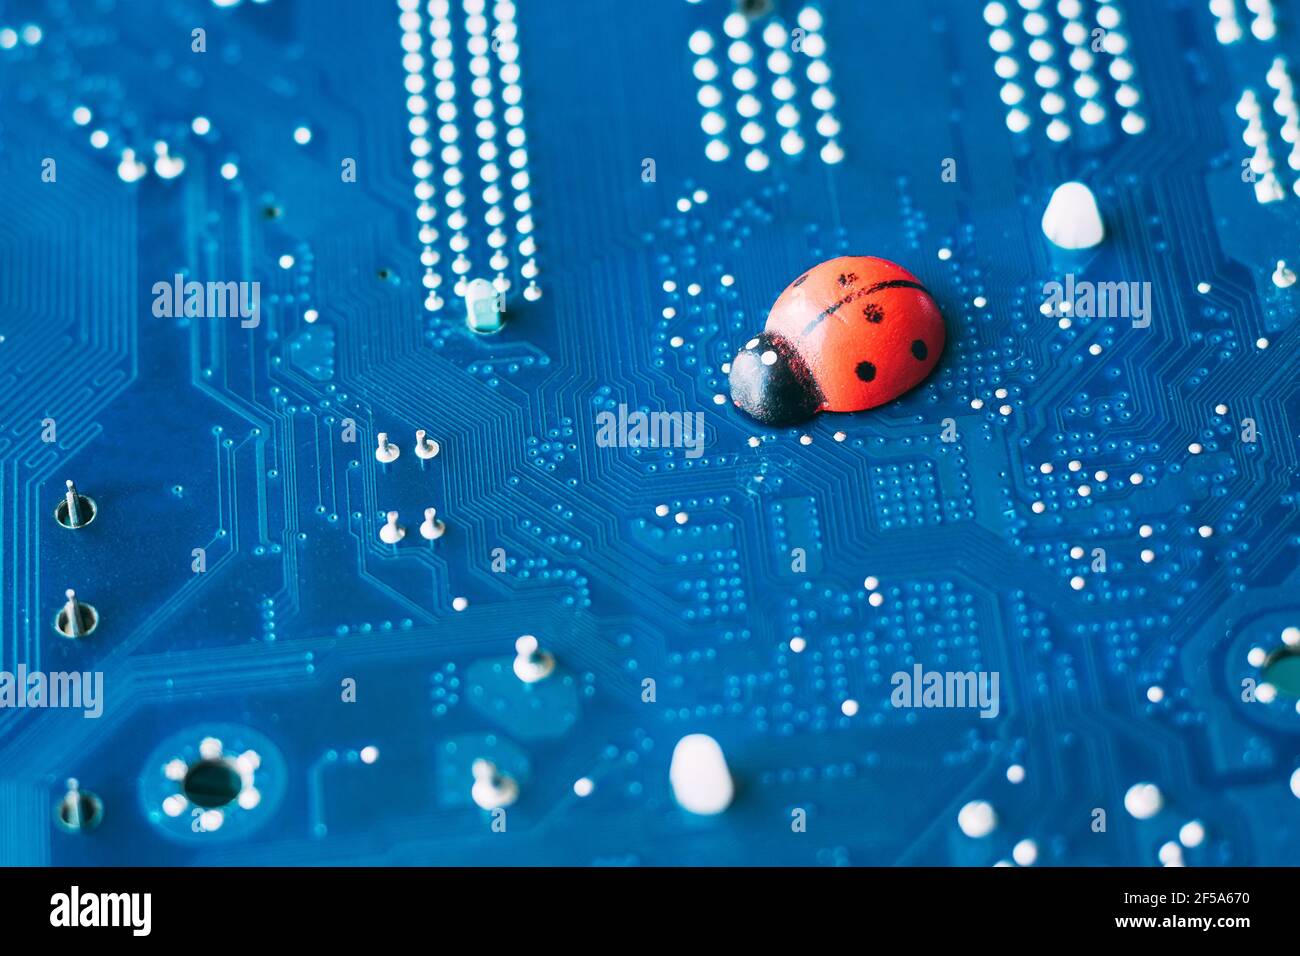 Little red ladybug on a blue motherboard. Concept of computer virus or bug, system failure, problem with technology, software or hardware Stock Photo